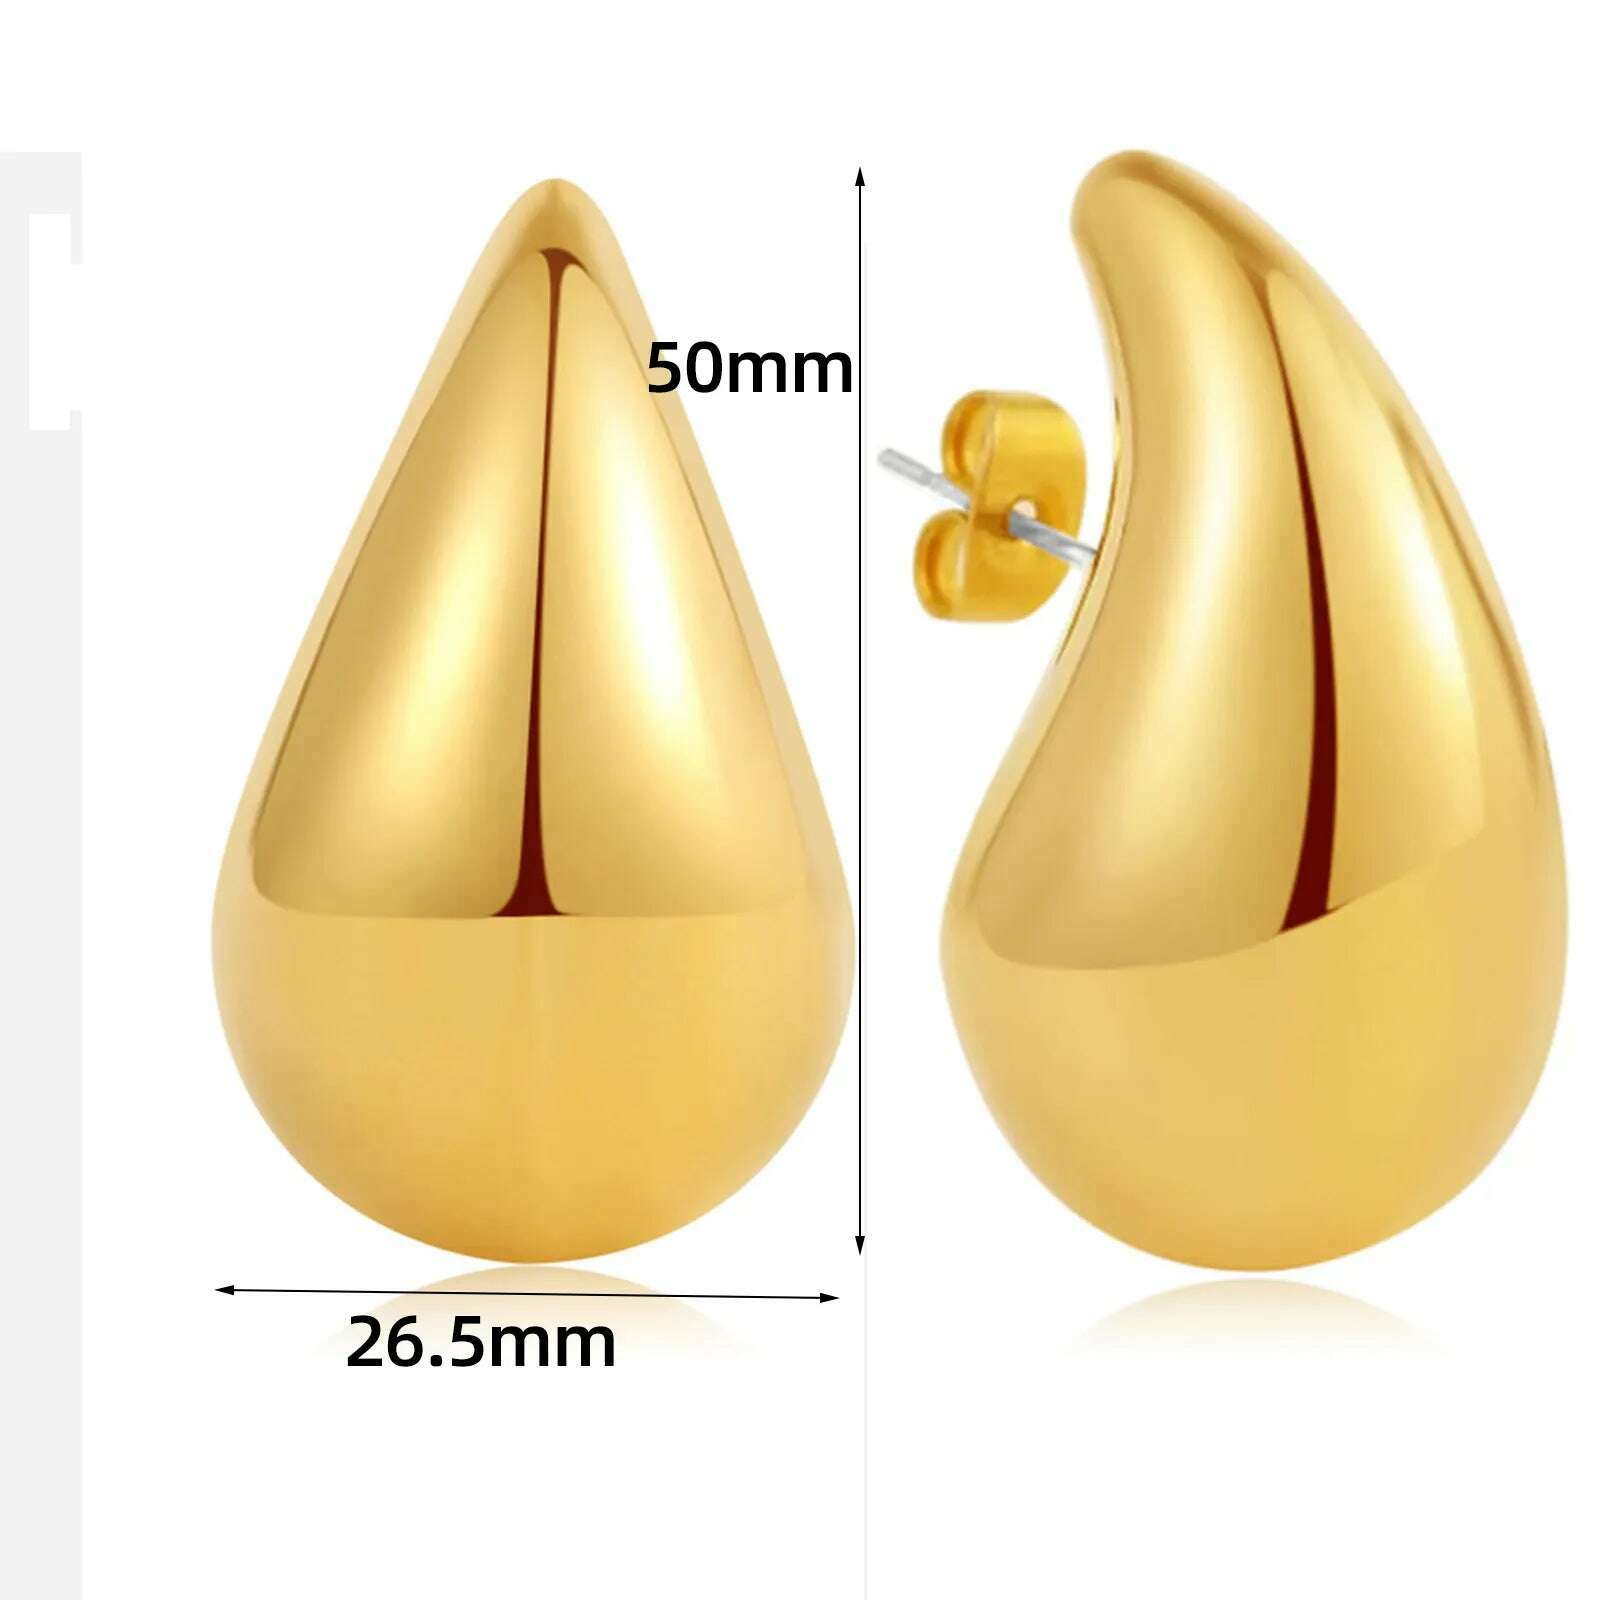 KIMLUD, Exaggerate 50mm Big Water Drop 18K Gold Plated Metal Oversize Dupes Thick Drop Earrings Lightweight Stainless Steel Jewelry New, gold color, KIMLUD Womens Clothes